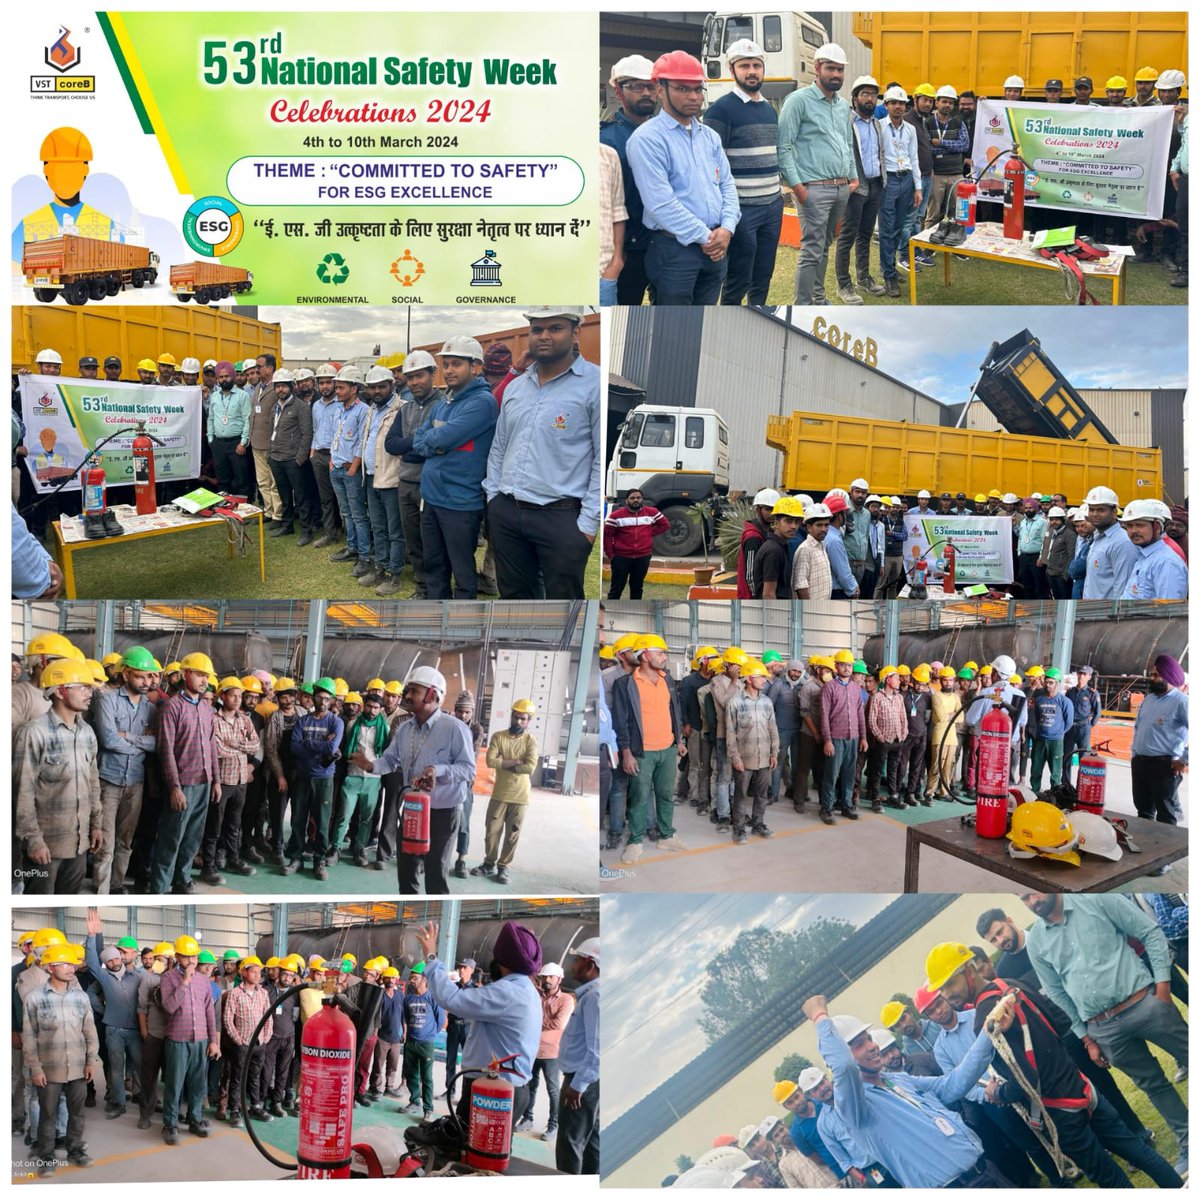 #53rdNationalSafetyWeekThis week, we've conducted intensive safety training sessions back-to-back across our units, reinforcing our commitment to workplace safety. #Vstcorebtrailers #nationalsafetyweek #safetyfirst #workplacesafety #Safetyculture #committedtosafety #esgexcellence